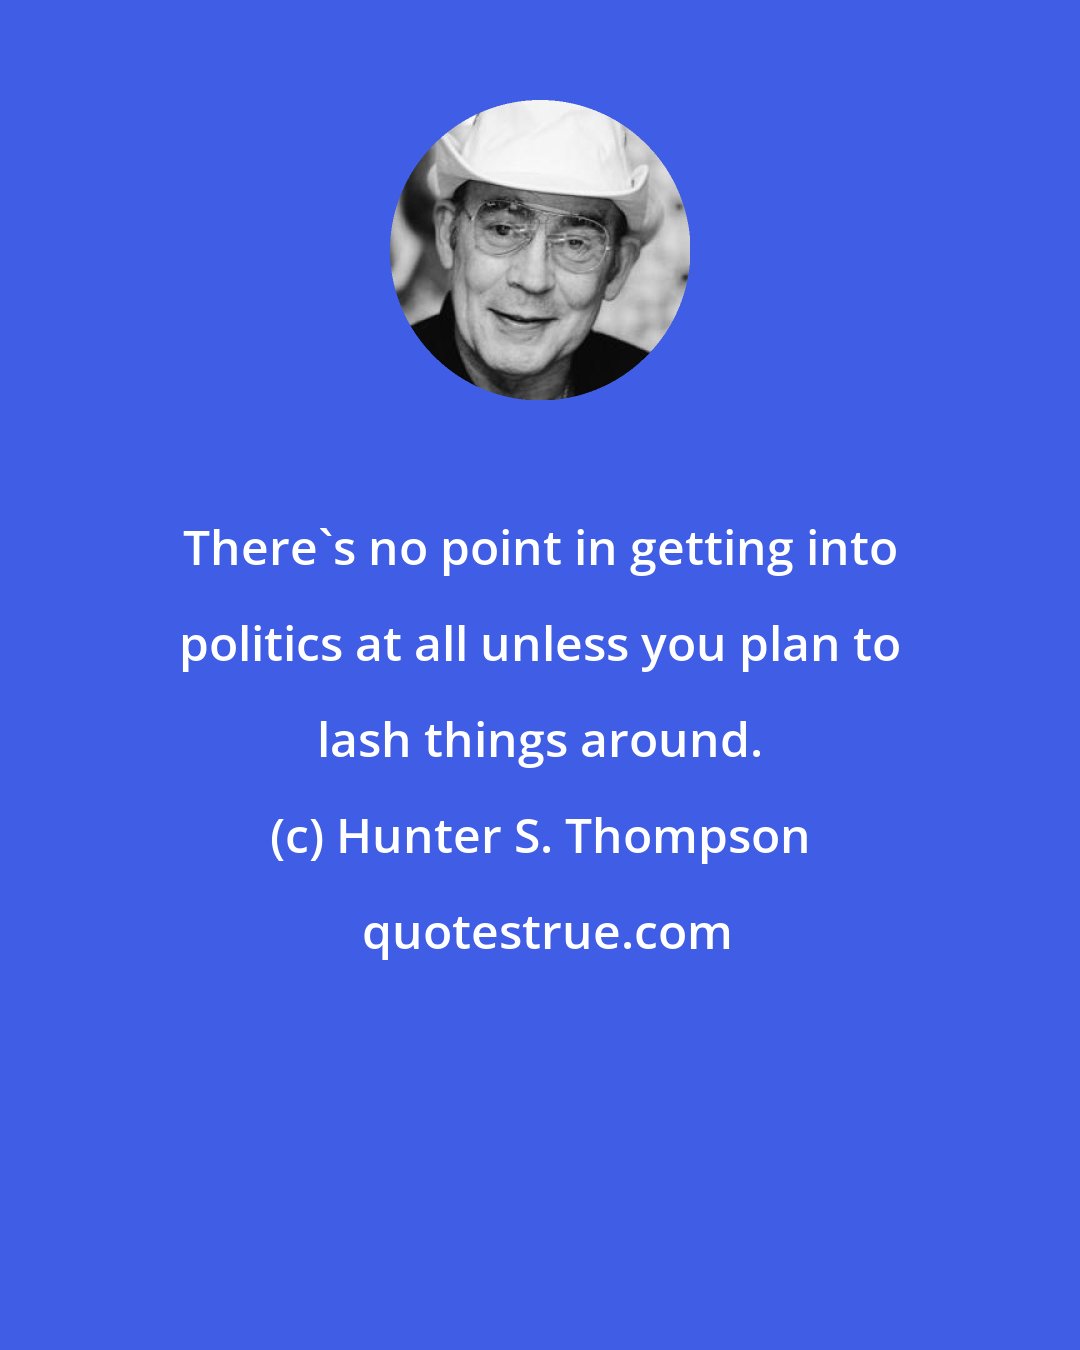 Hunter S. Thompson: There's no point in getting into politics at all unless you plan to lash things around.